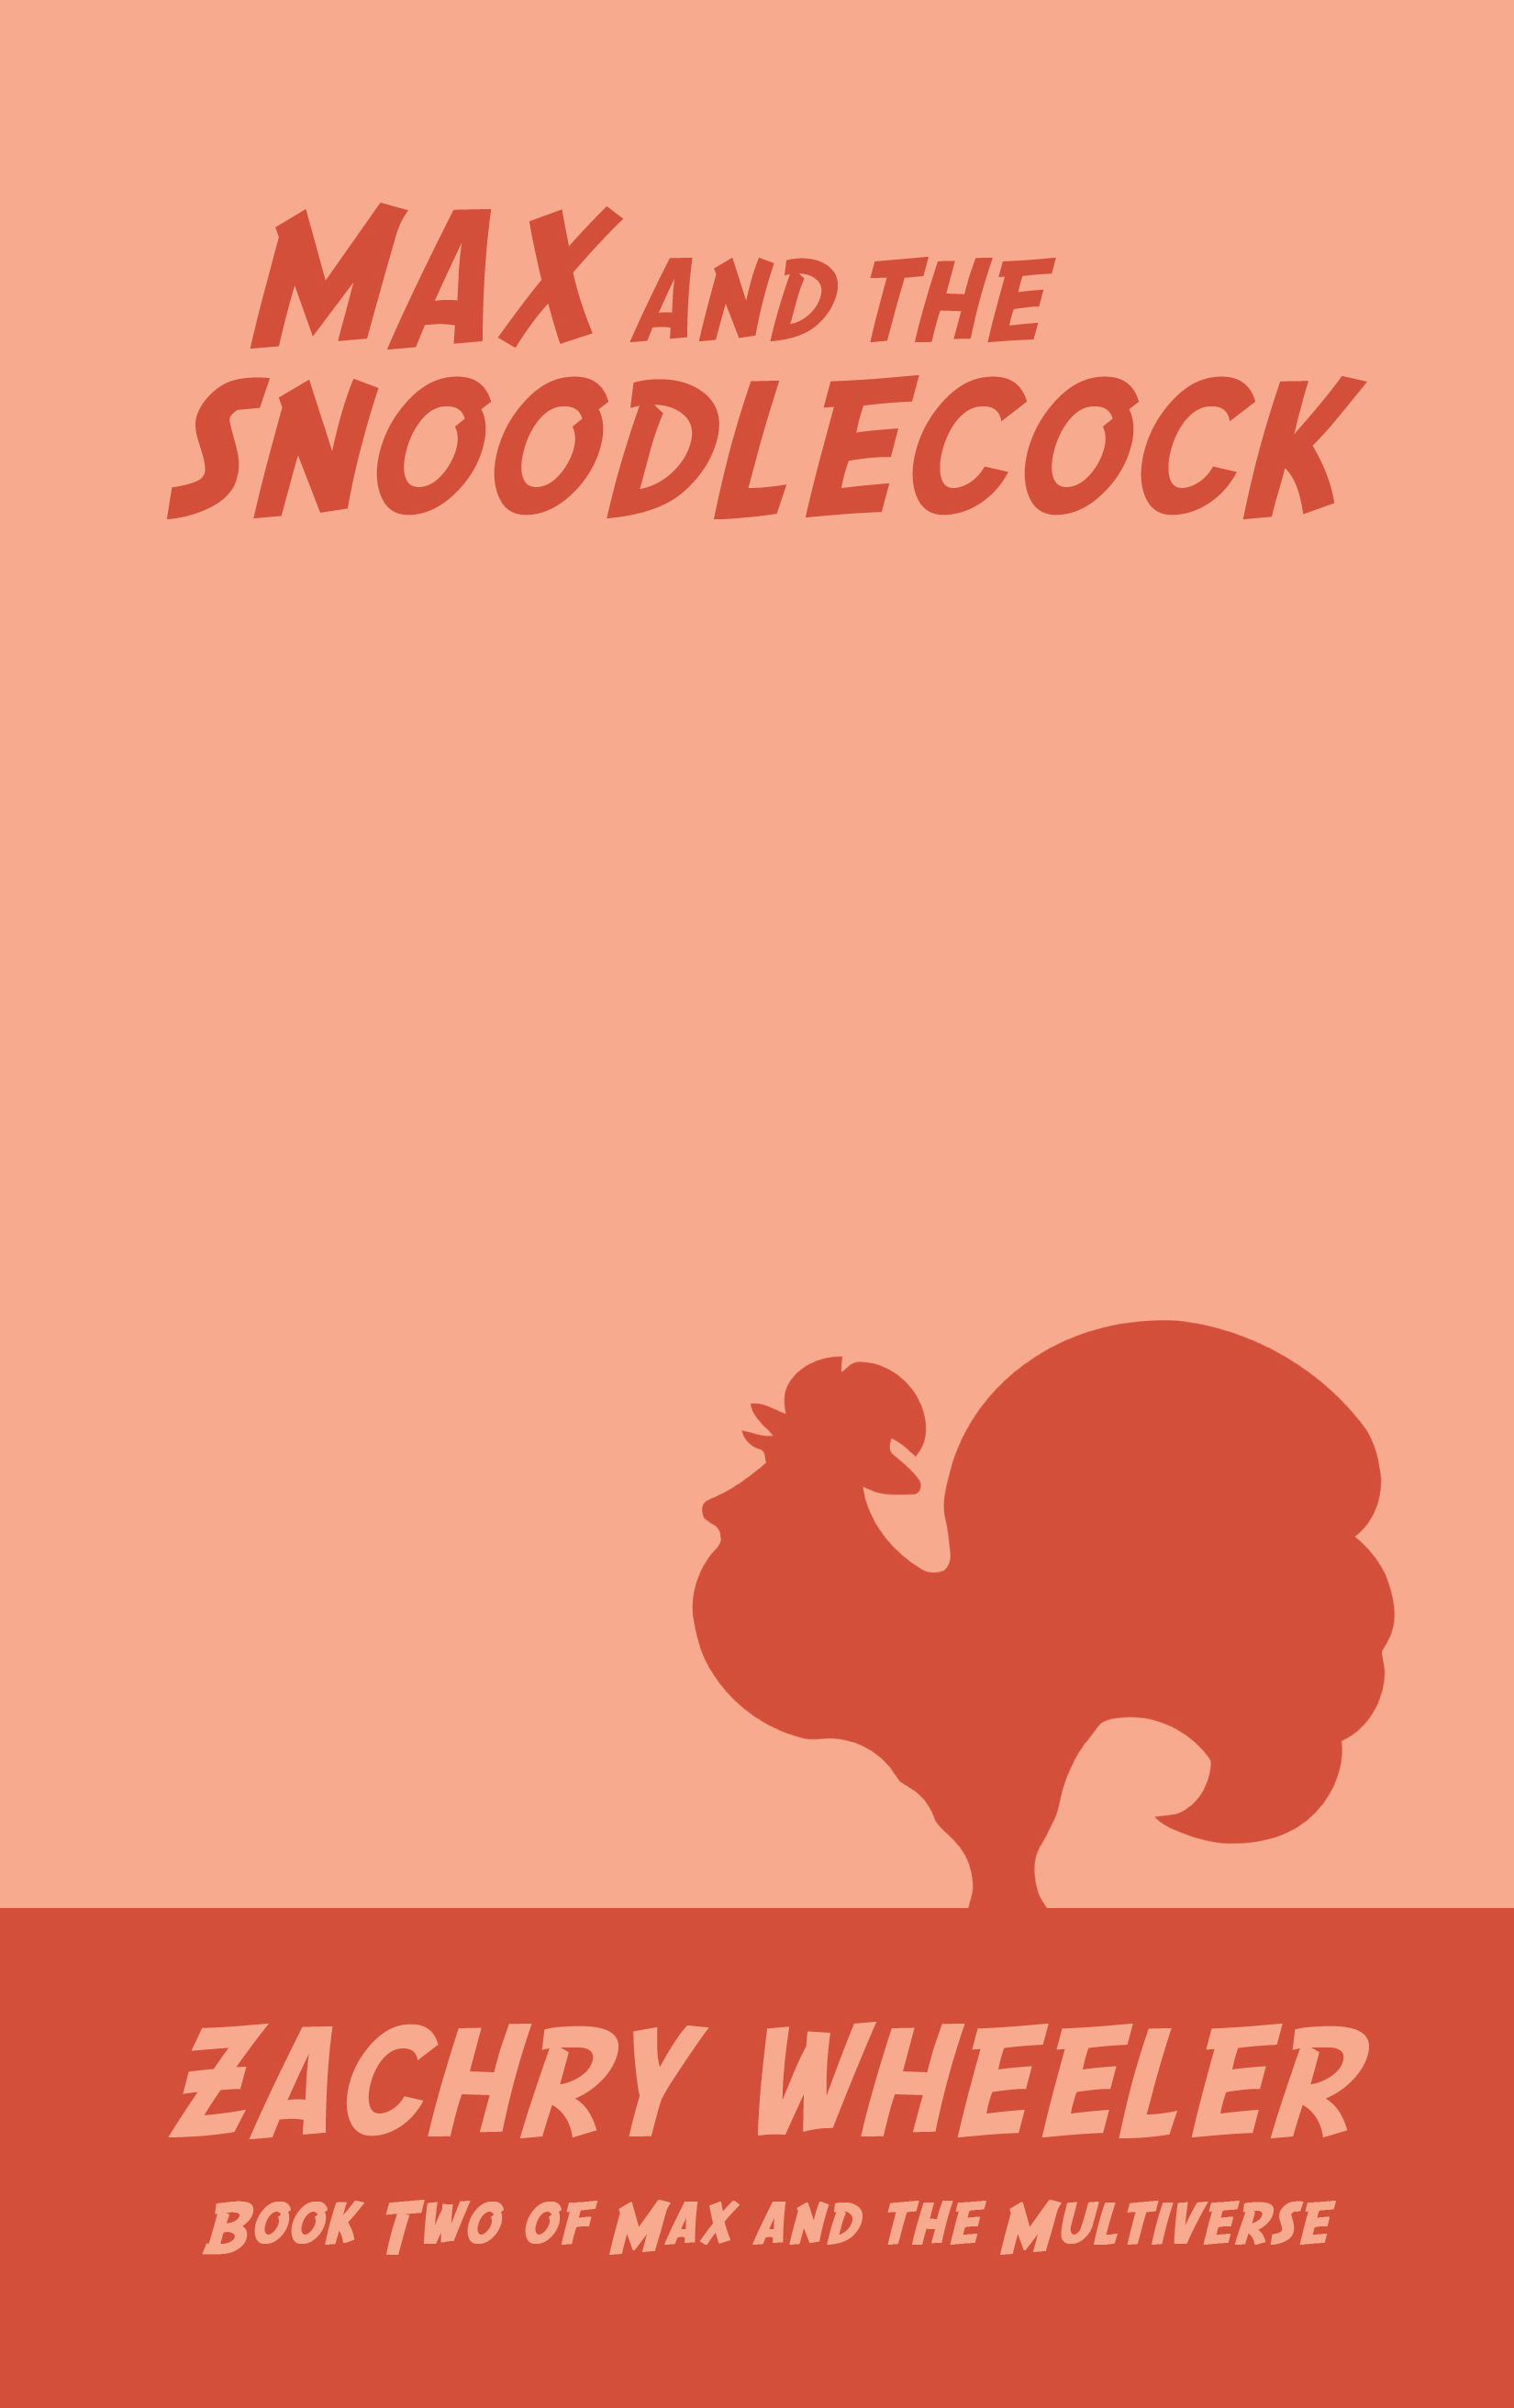 FREE: Max and the Snoodlecock: Book Two of Max and the Multiverse by Zachry Wheeler